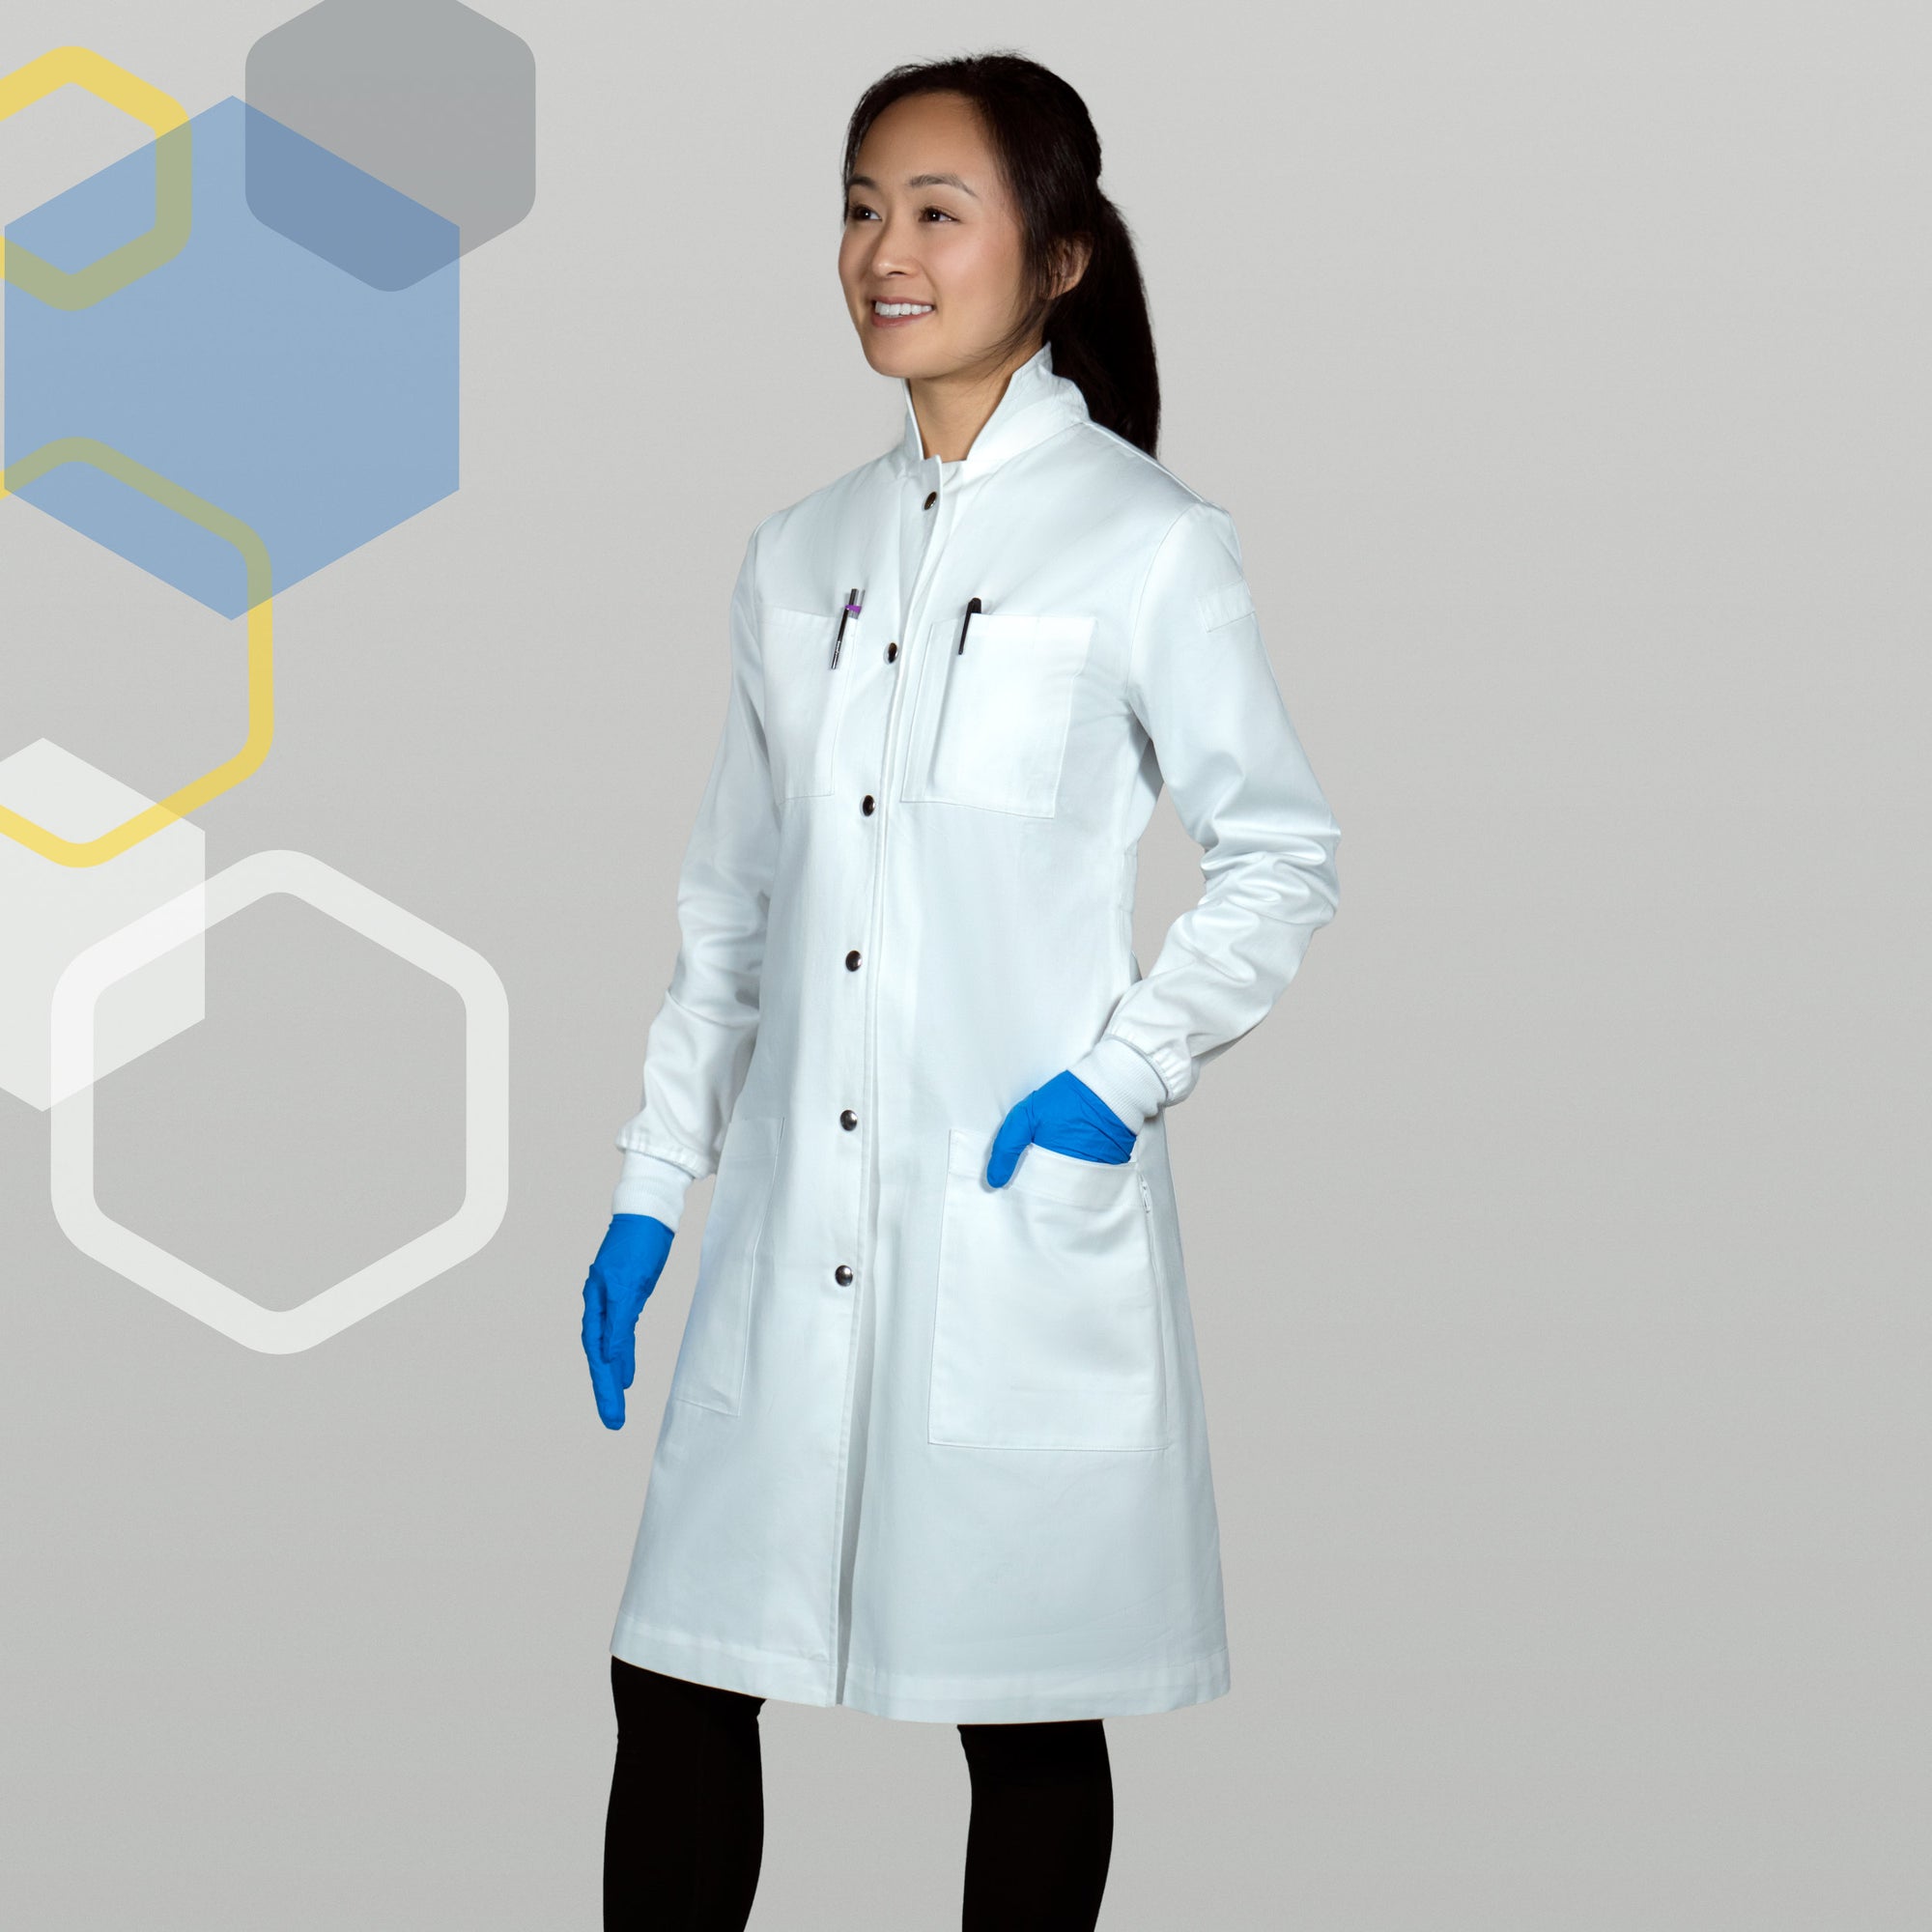 "Curie" women's chemistry lab coat with features of 100% cotton, cuffed sleeves, metal snaps, high collar, water resistant